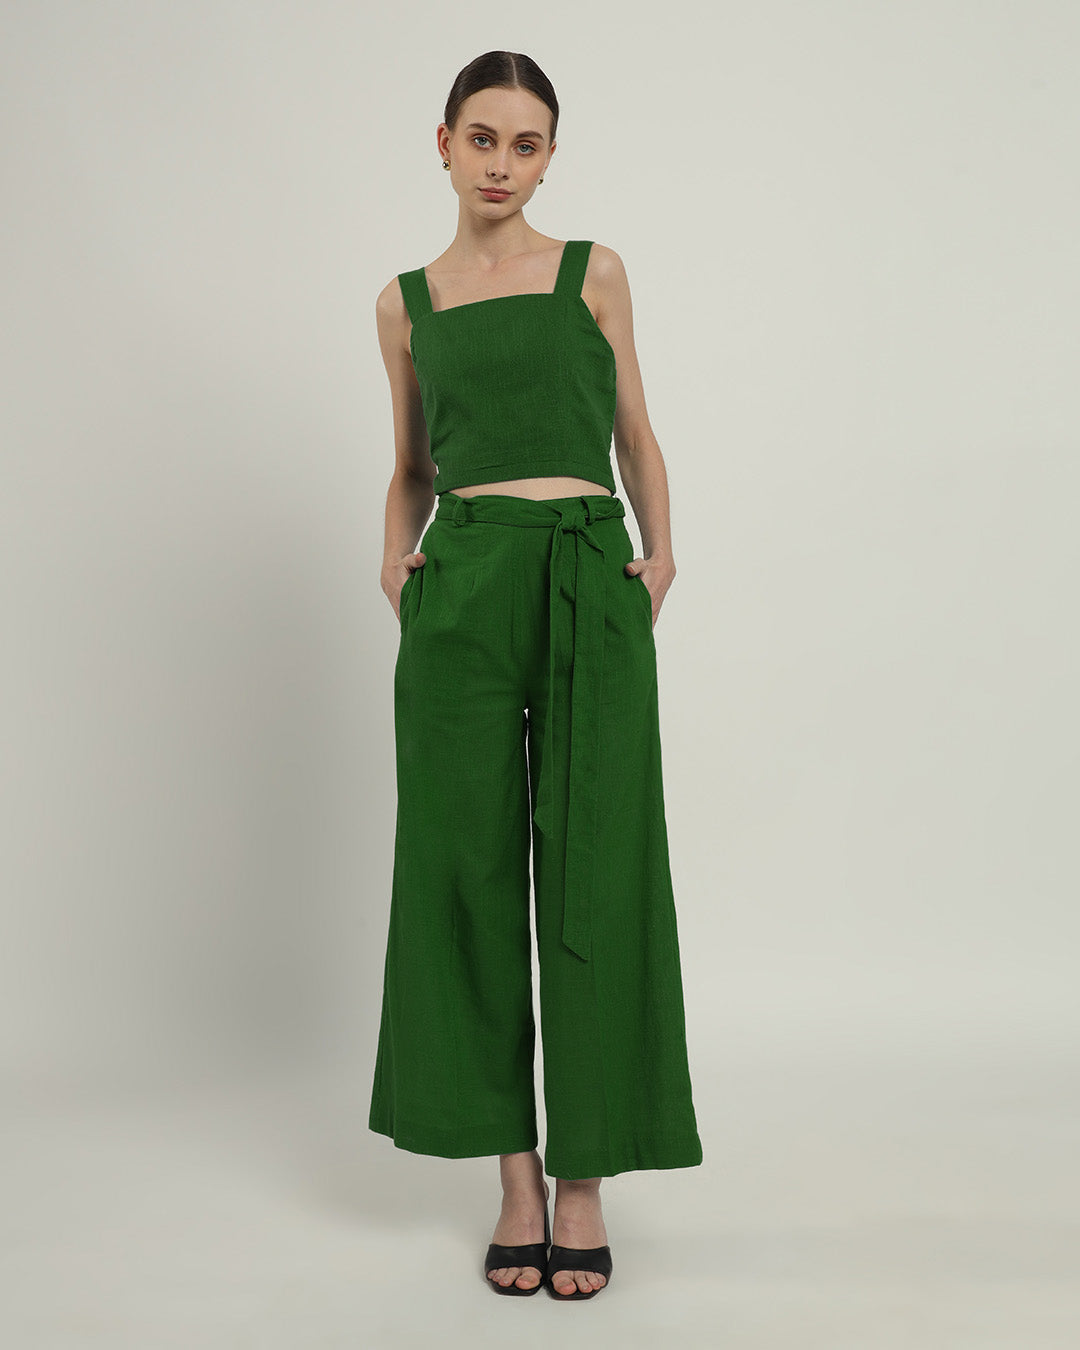 Emerald Sleek Square Crop Solid Top (Without Bottoms)